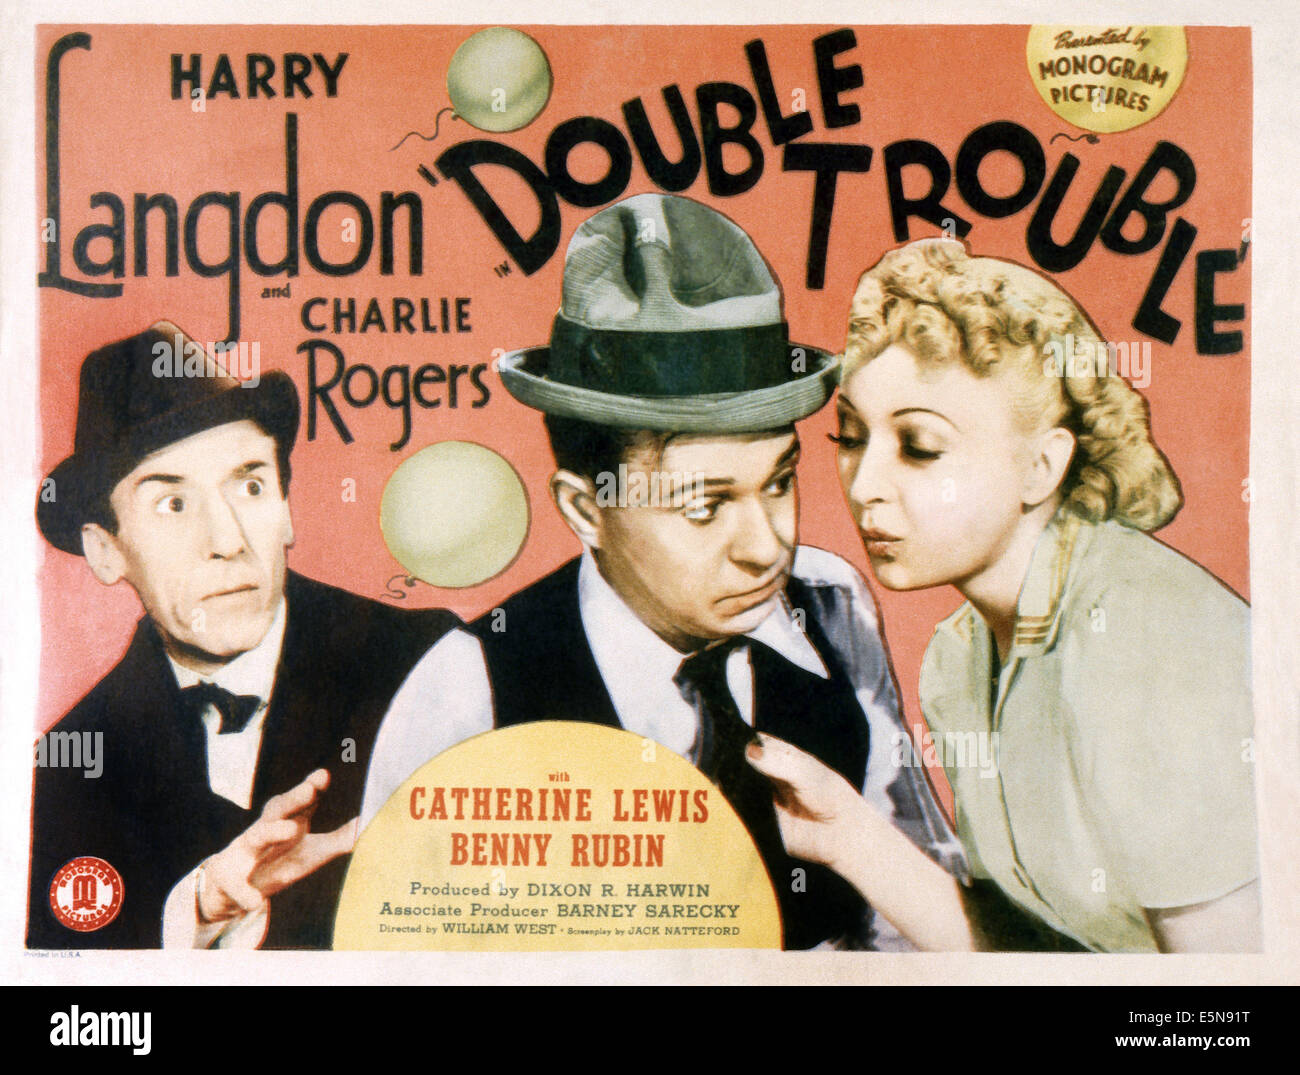 DOUBLE TROUBLE, from left: Charley Rogers, Harry Langdon, Cathy Lewis, 1941 Stock Photo